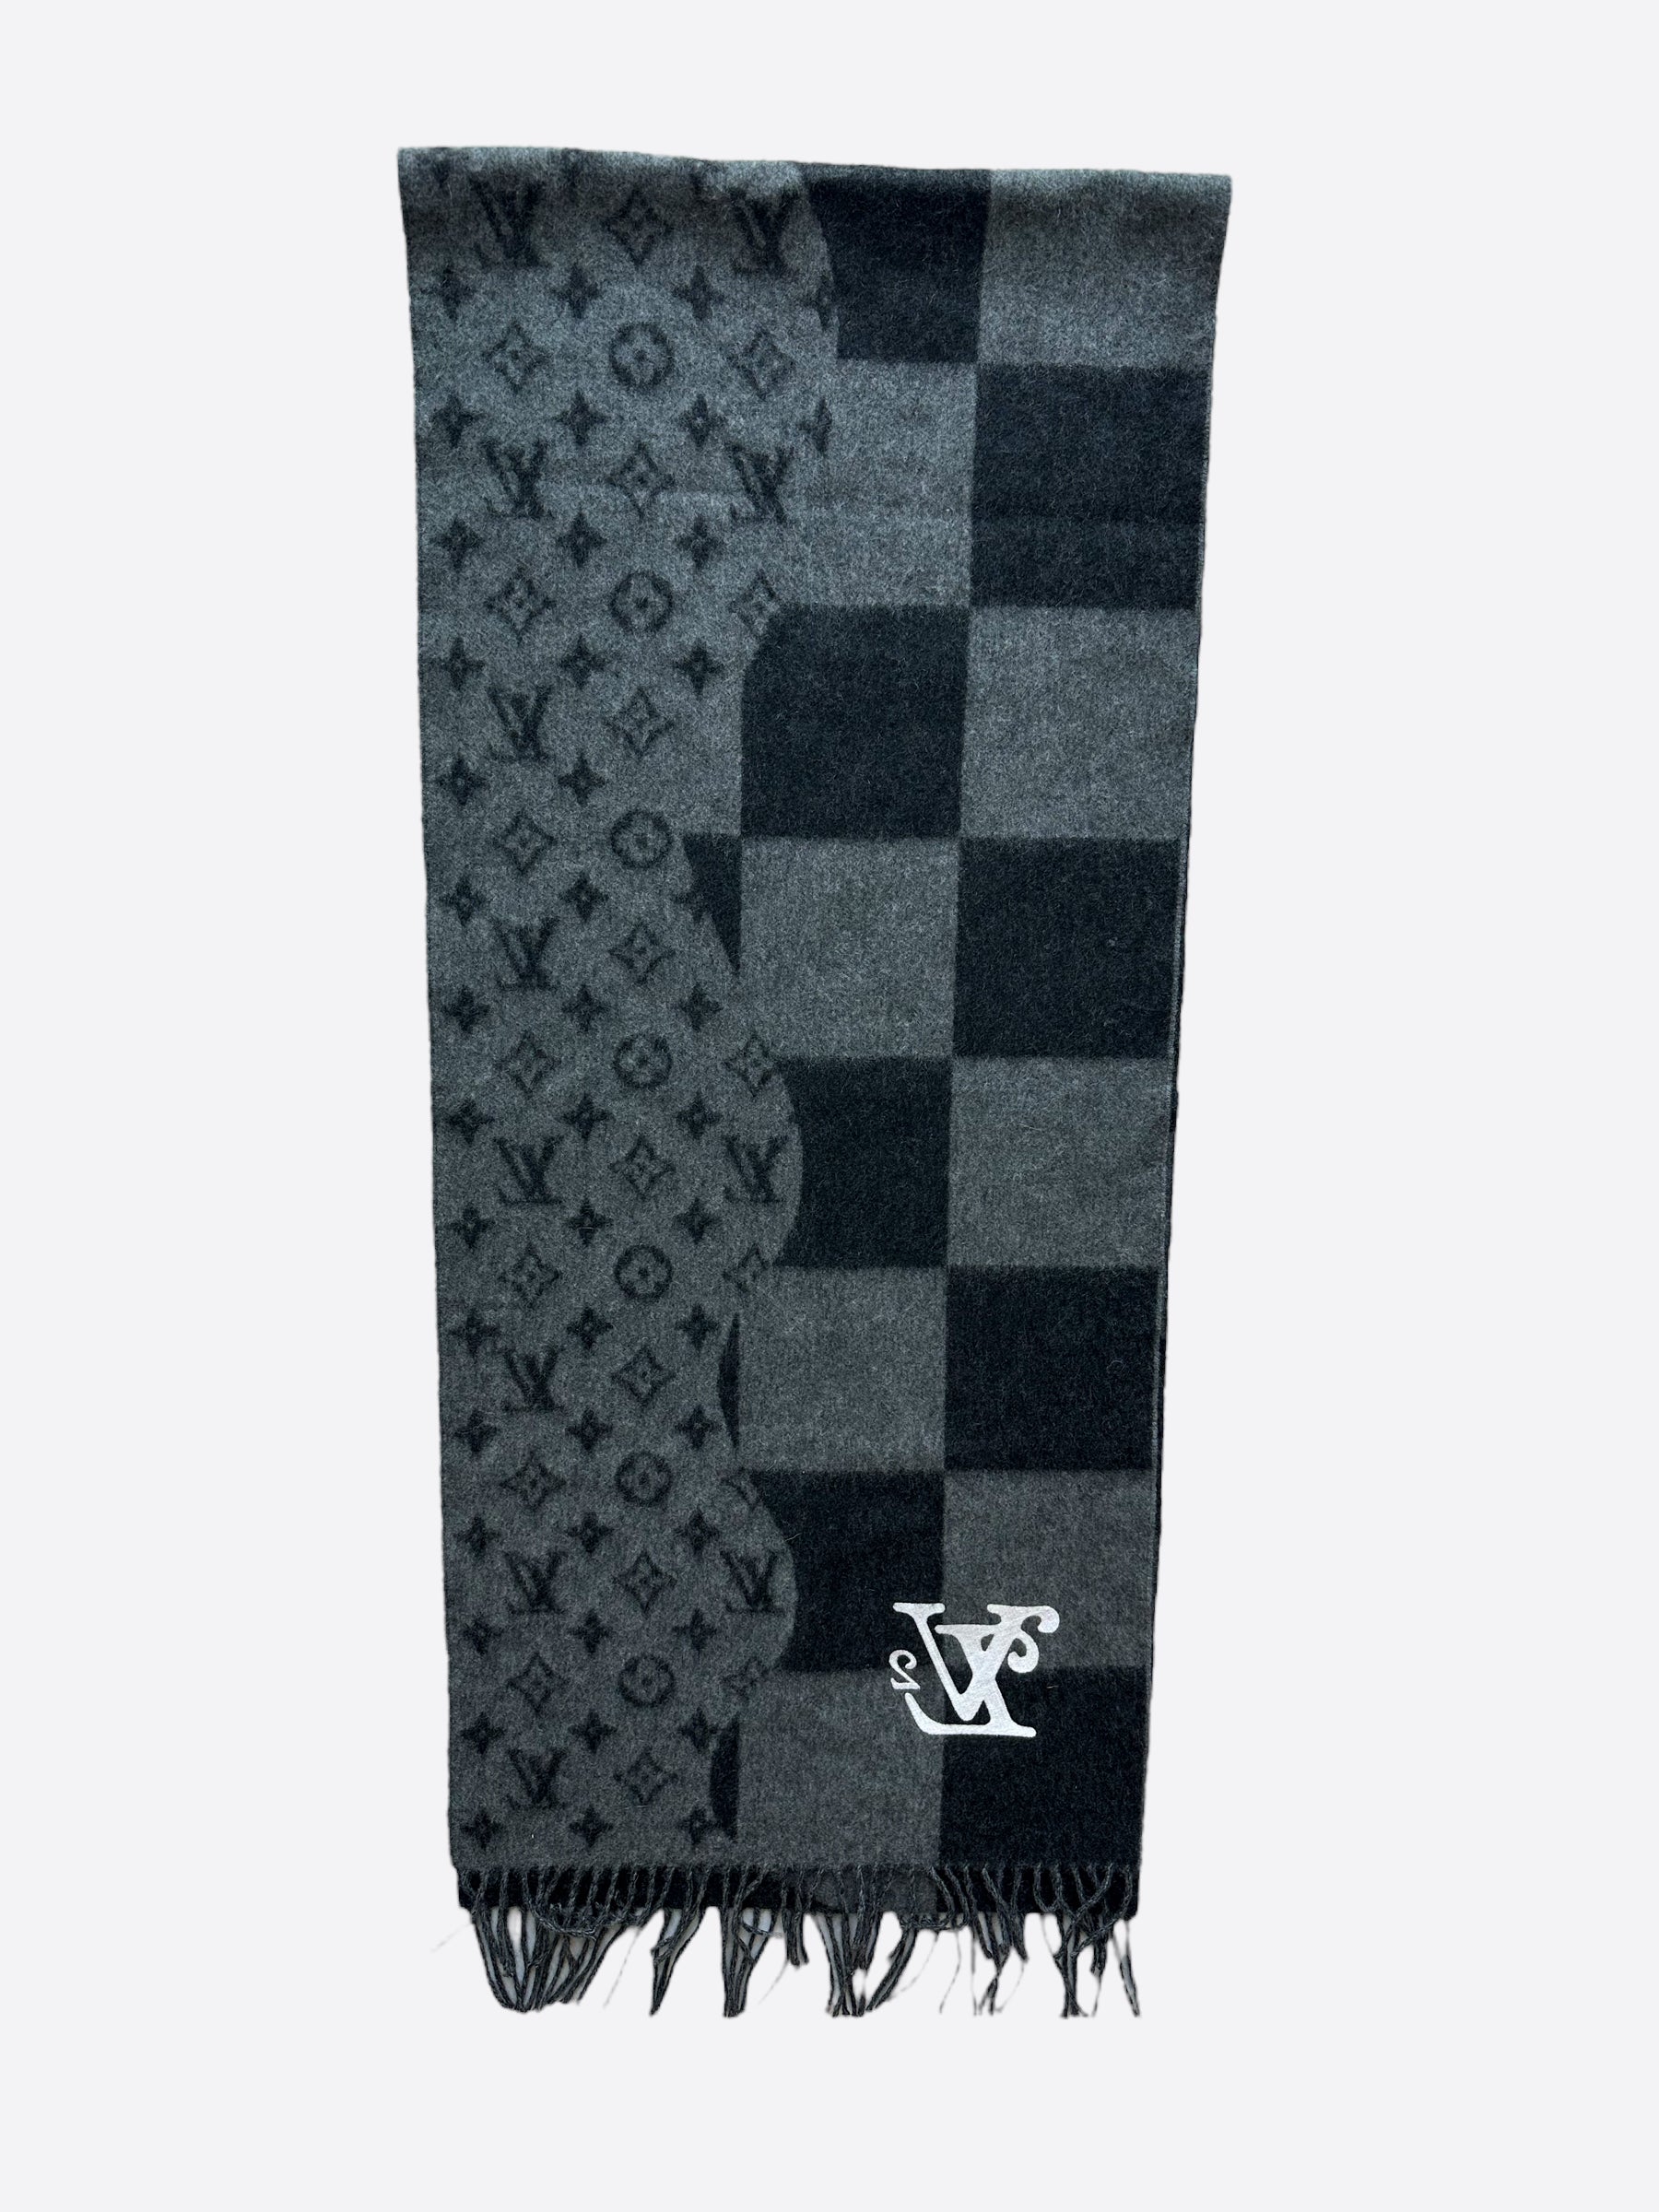 Louis Vuitton Mng Giant Scarf, Grey, One Size